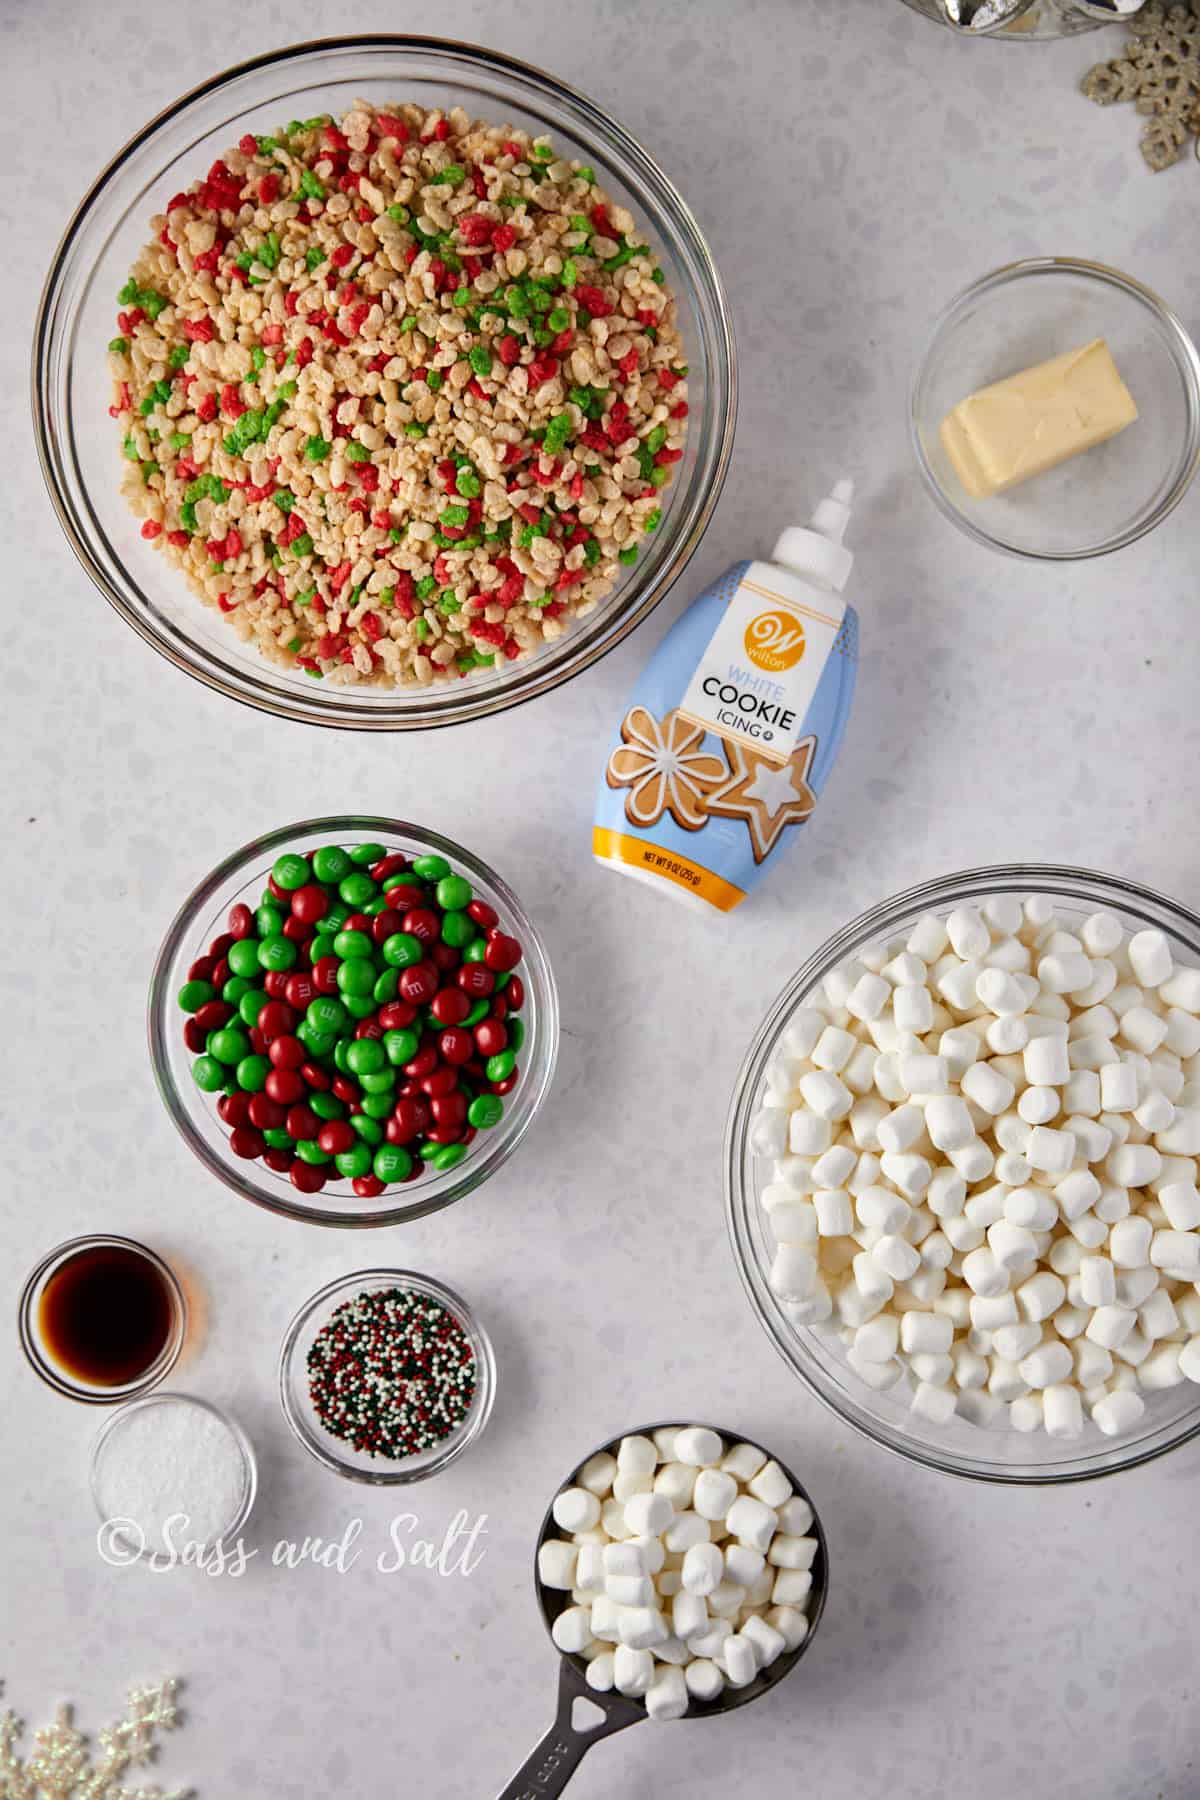 Overhead view of a kitchen counter with ingredients for Easy Rice Krispie Treats, including a bowl of Rice Krispies cereal, marshmallows, butter, vanilla extract, salt, sprinkles, frosting, and a colorful assortment of red and green M&M's, all neatly arranged and ready for preparation.